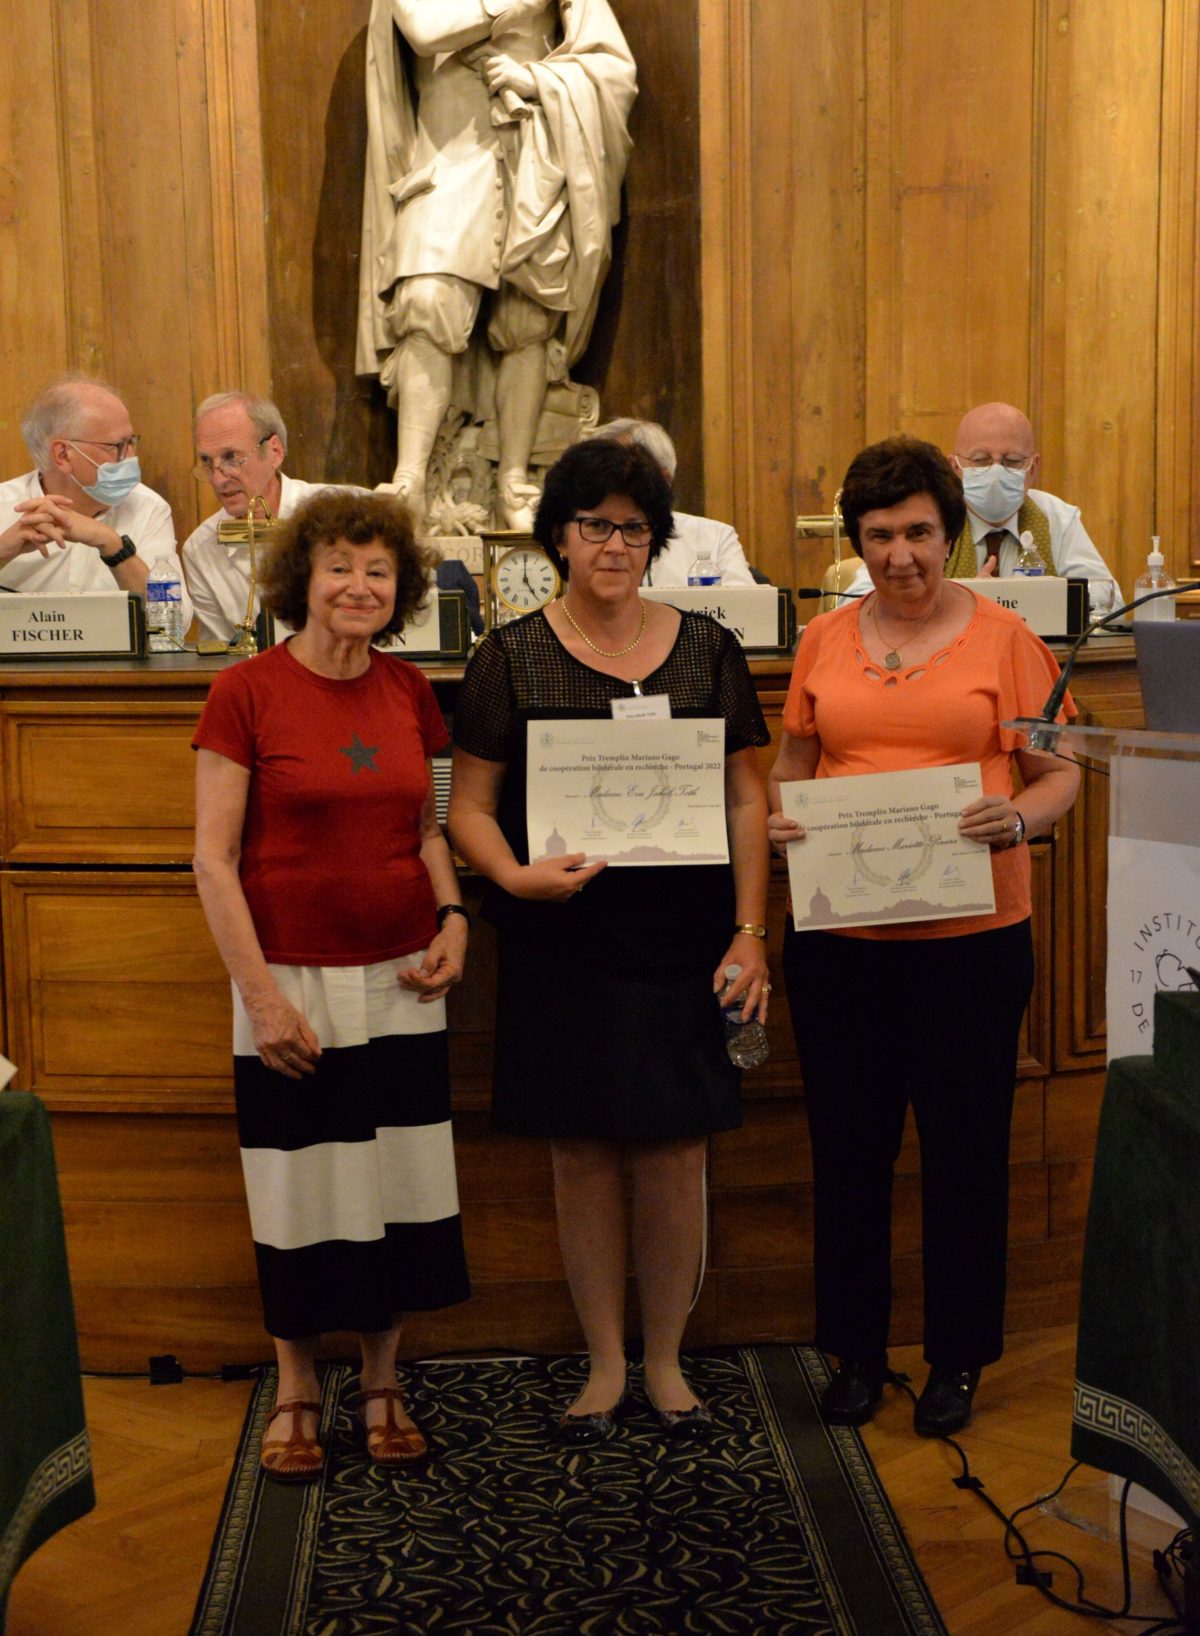 Mariano Gago prize awarded to the collaboration between the group of Eva Jakab Toth and the University of Coimbra, Portugal